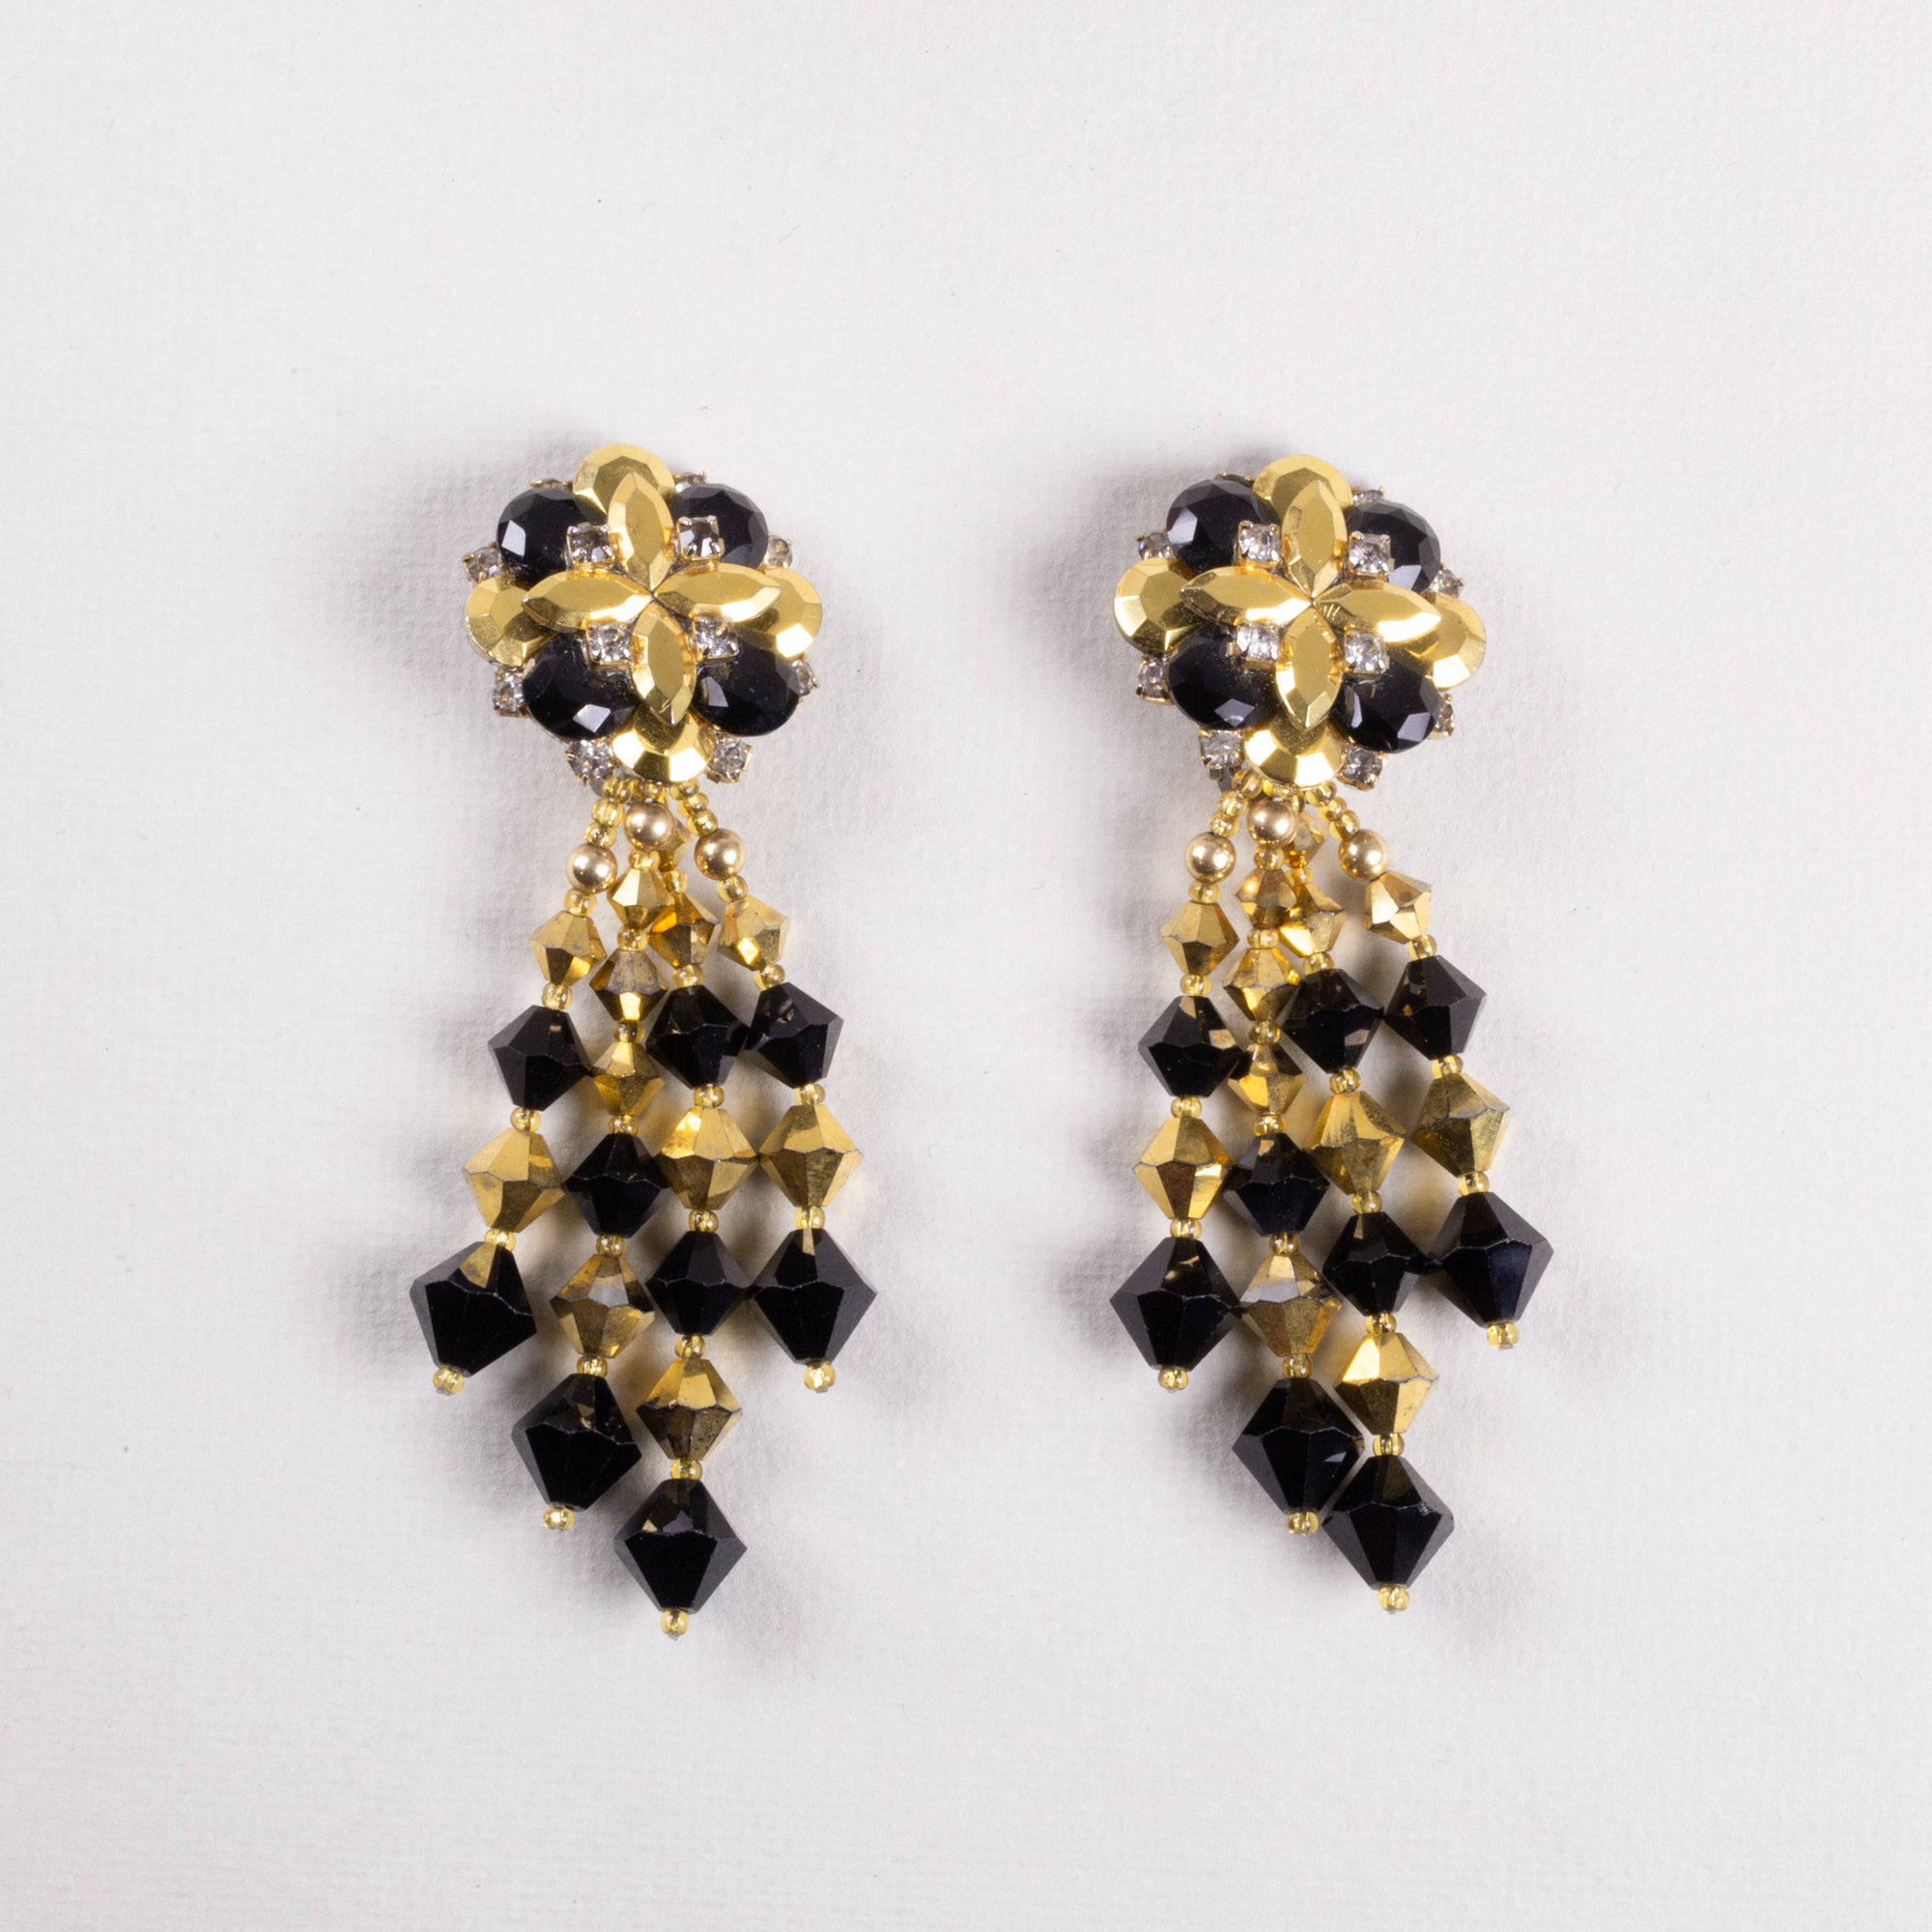 Vintage Gold and Black Clip-on Earrings